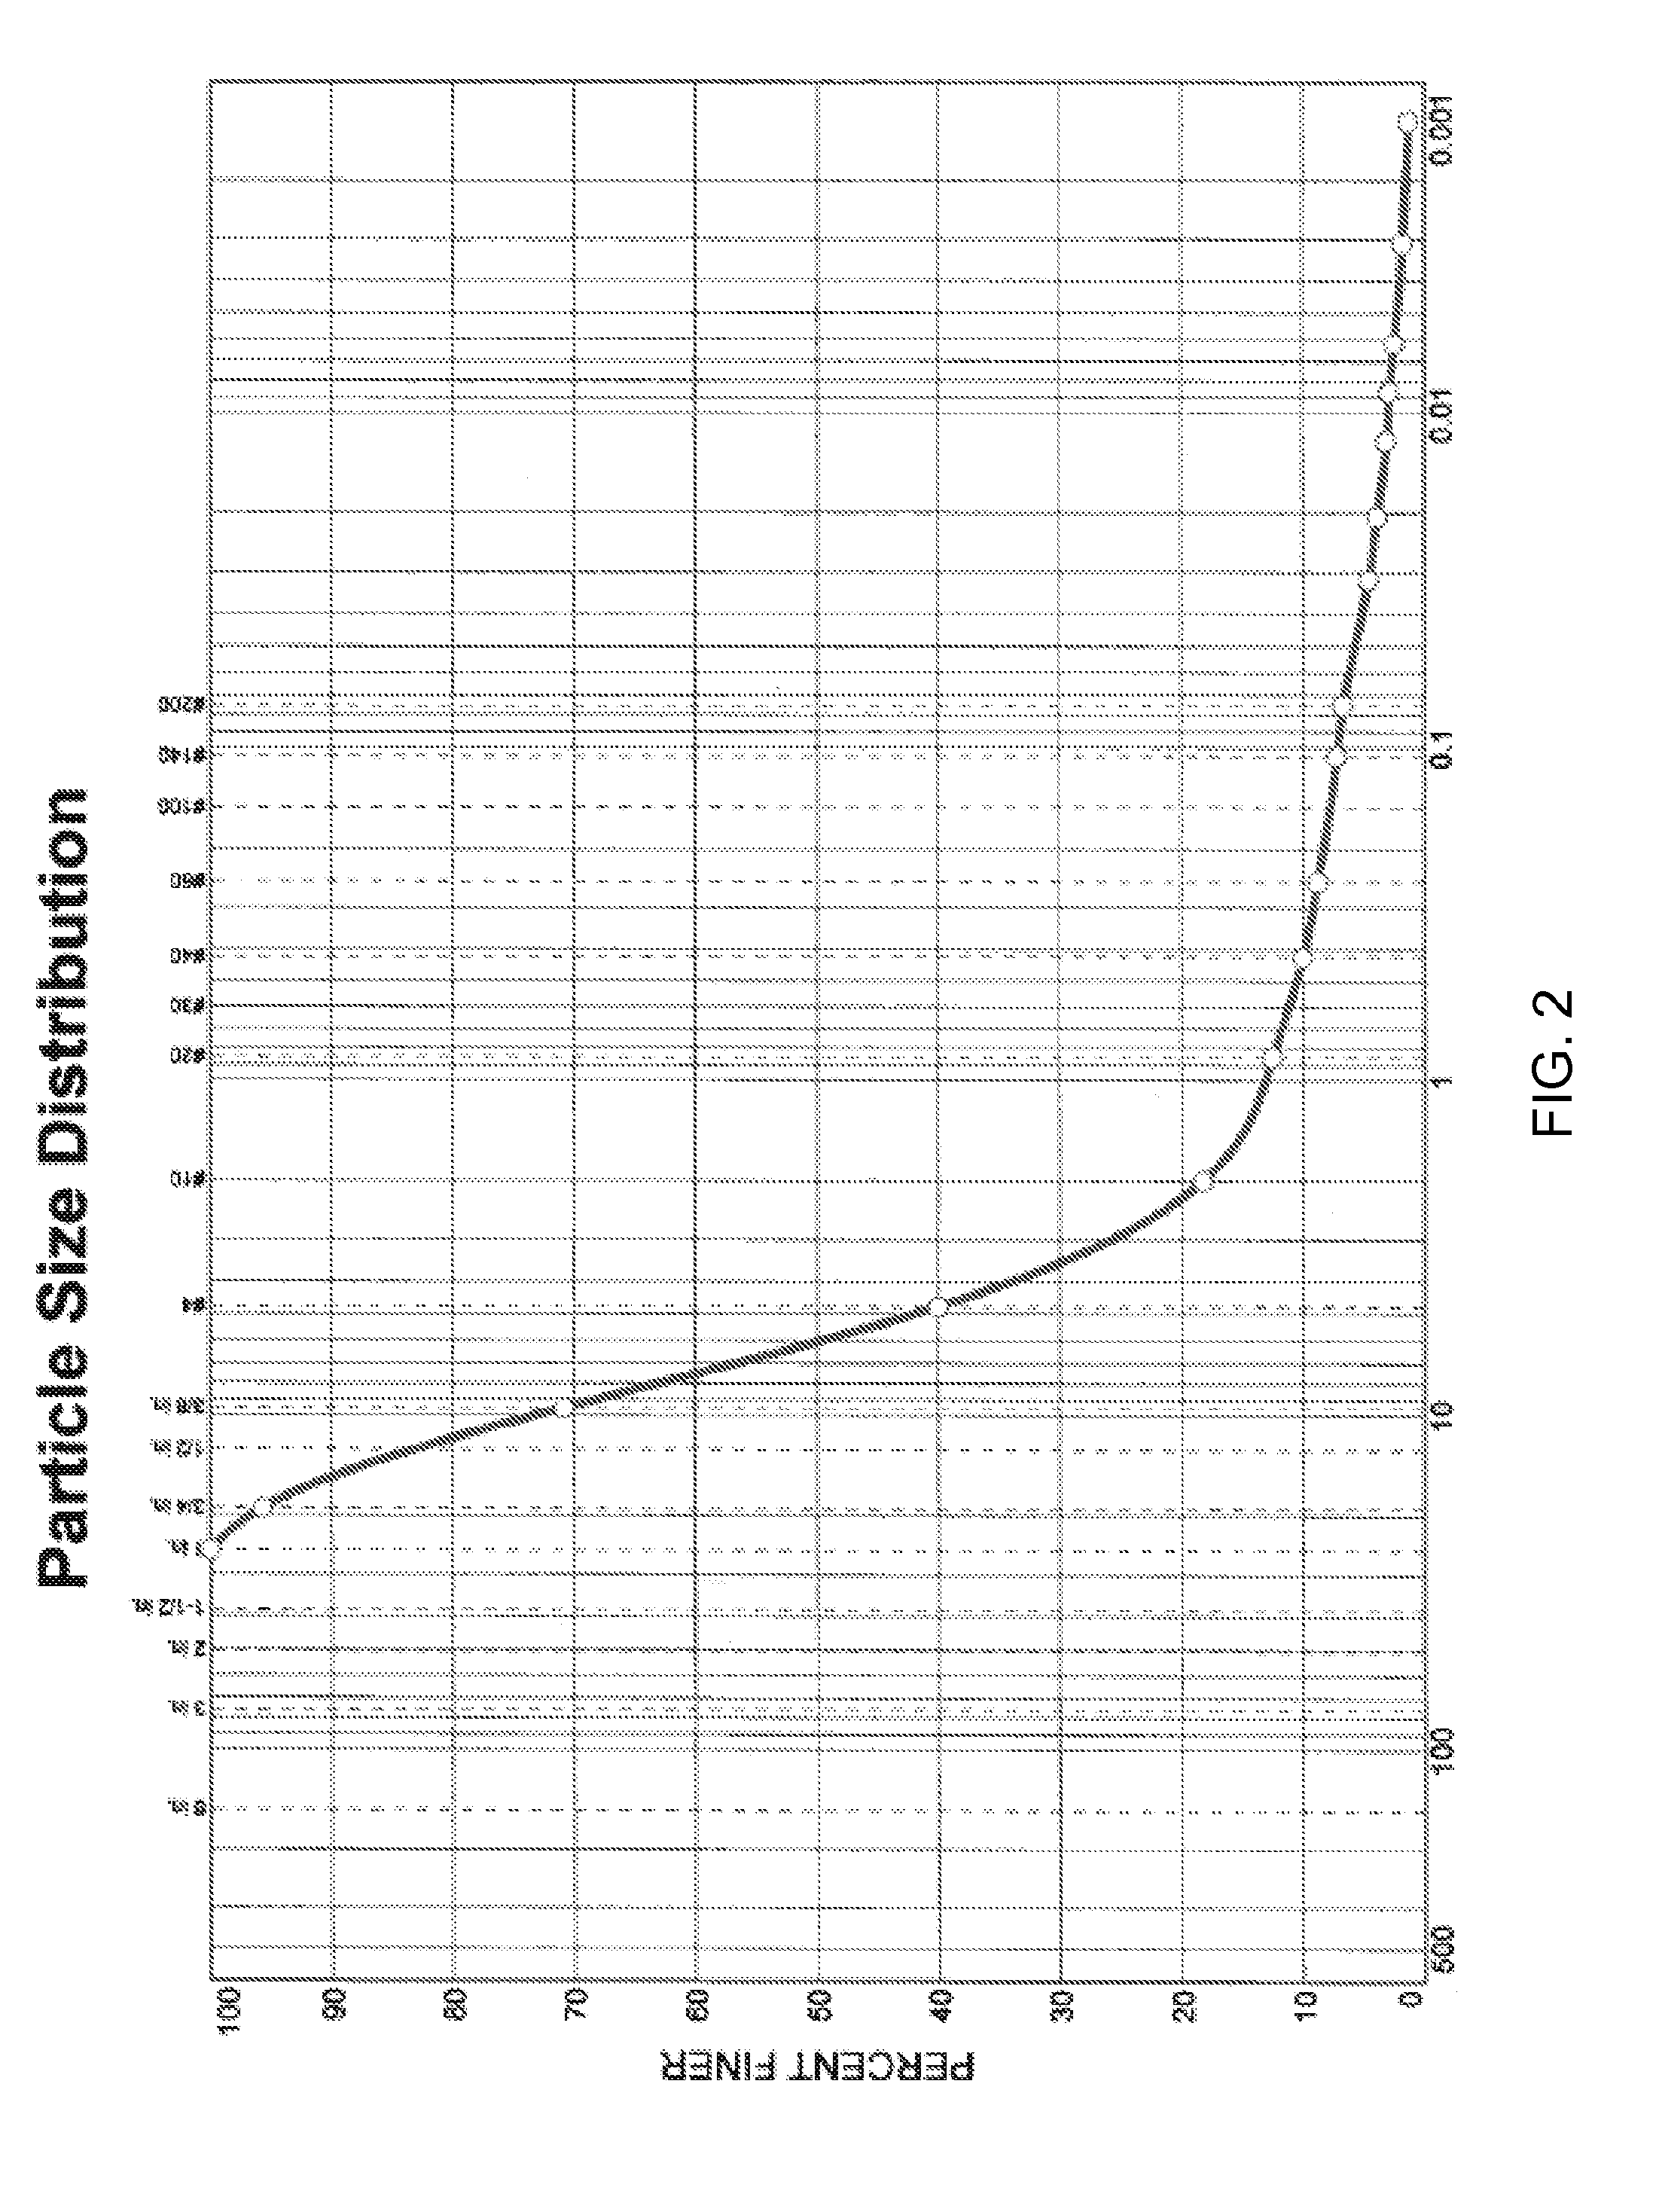 Method and material for paving a surface